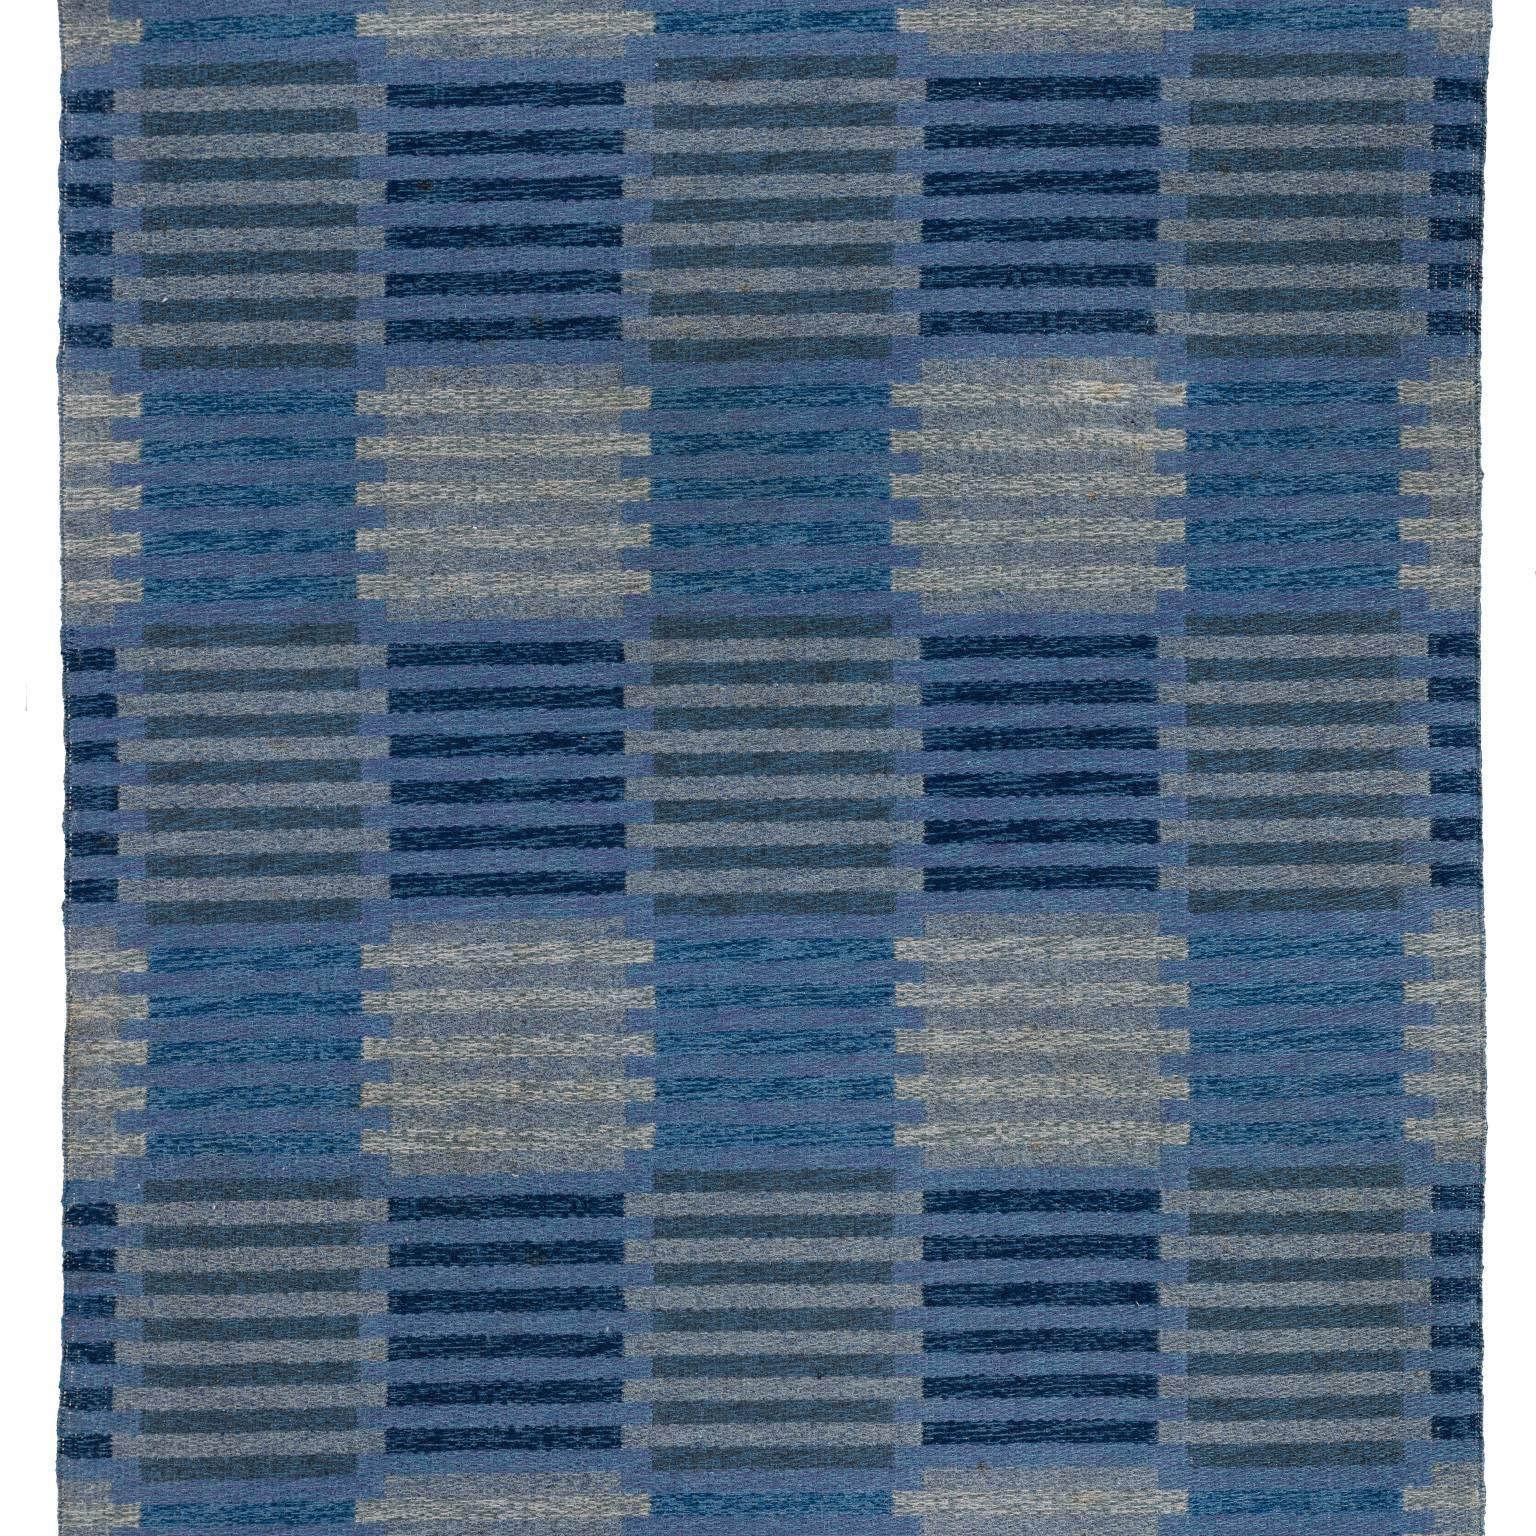 Carl Malmsten Scandinavian Modern Mid-20th Century Vintage Rug In Good Condition For Sale In Stockholm, SE